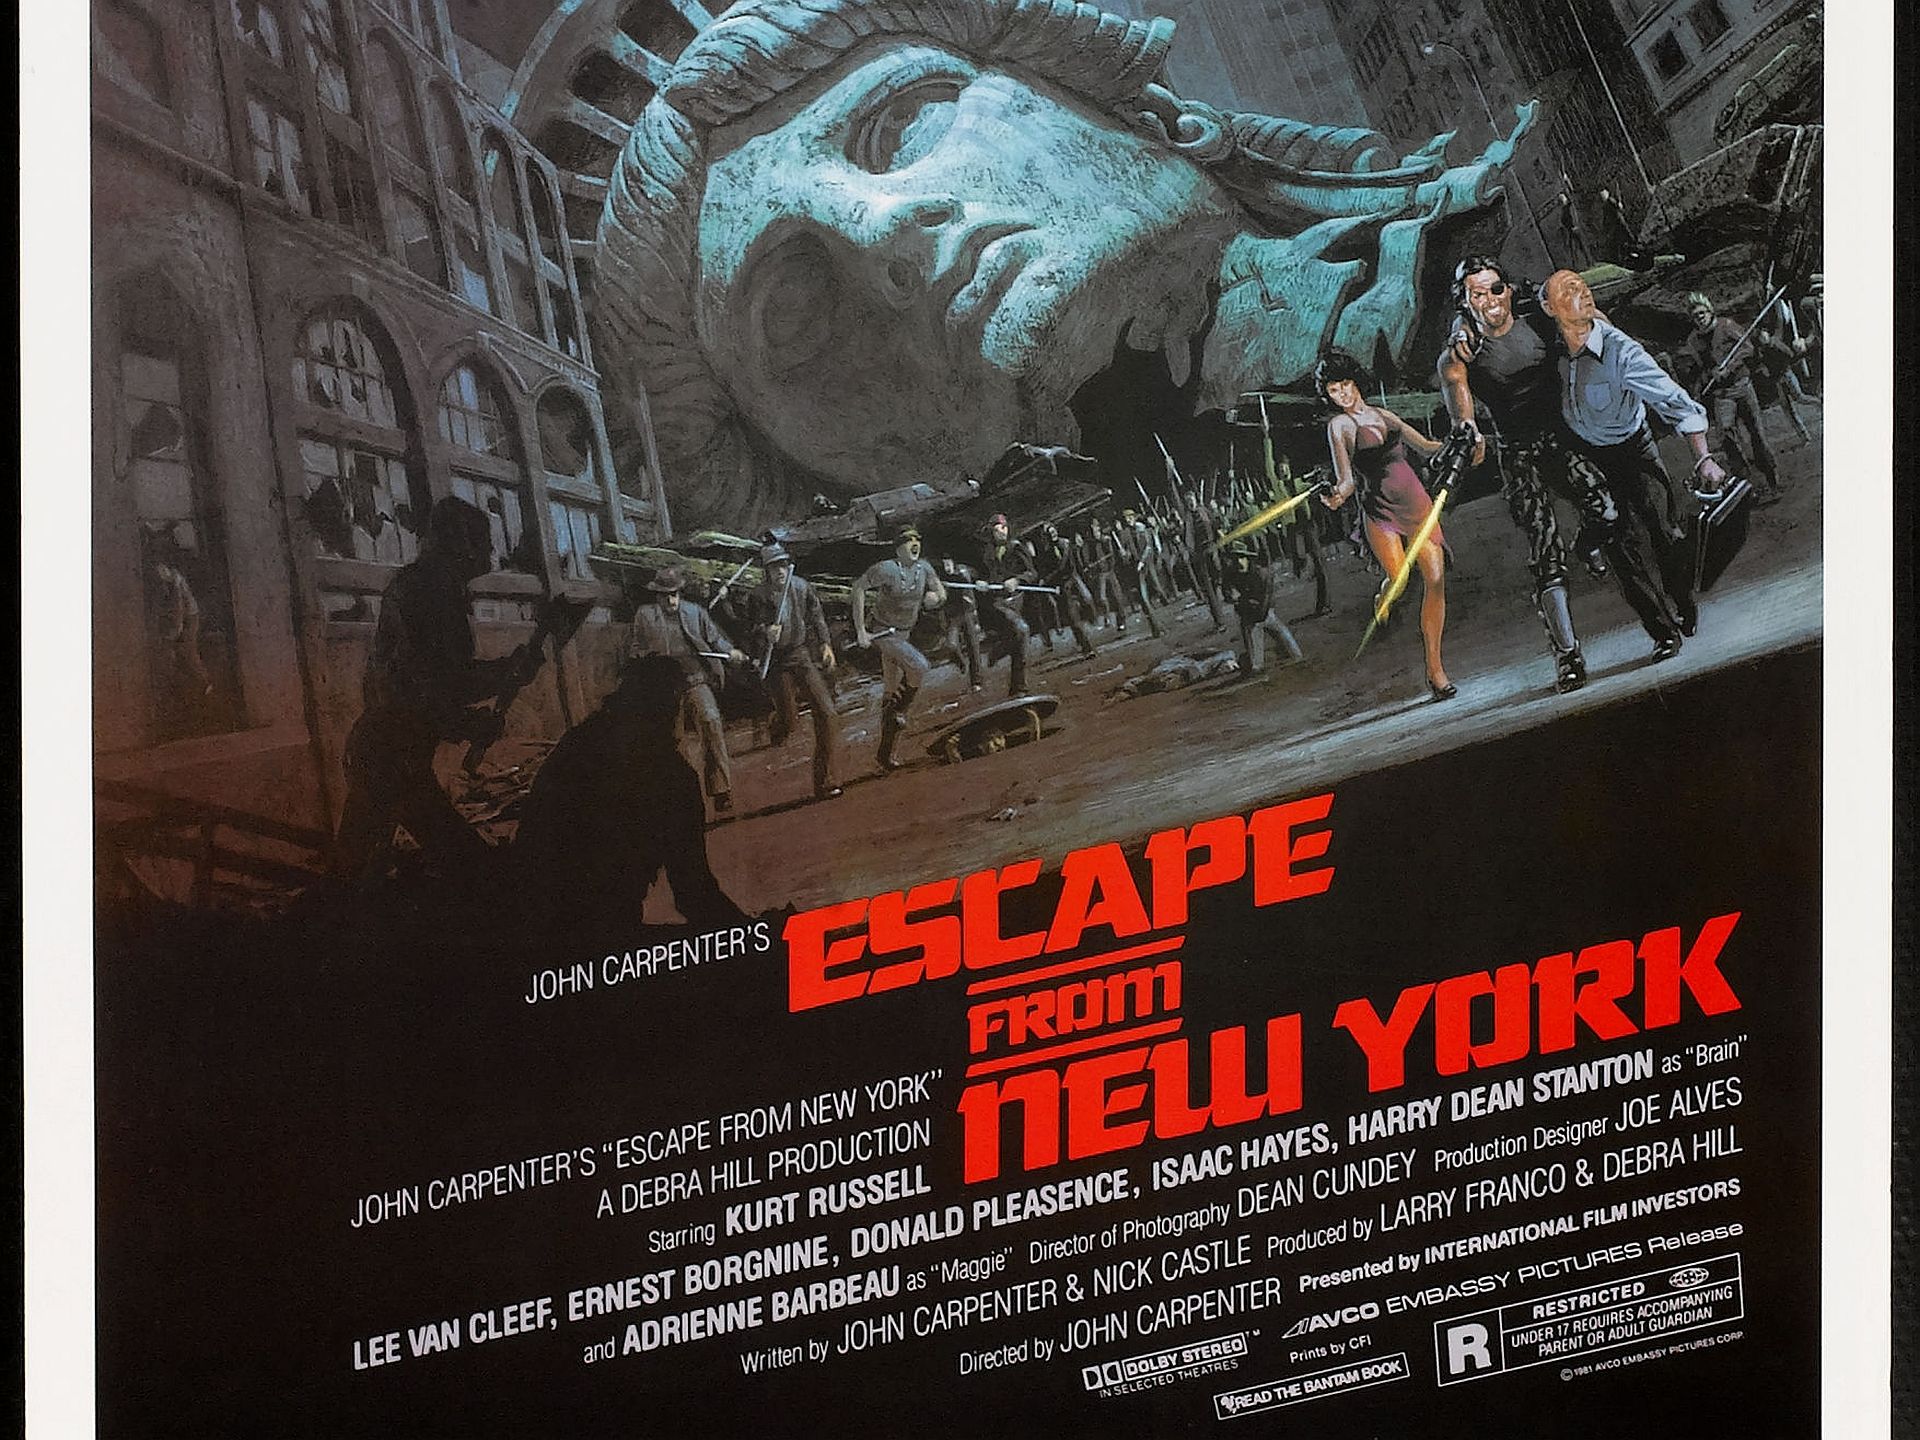 Movie Escape From New York Wallpaper:1920x1440